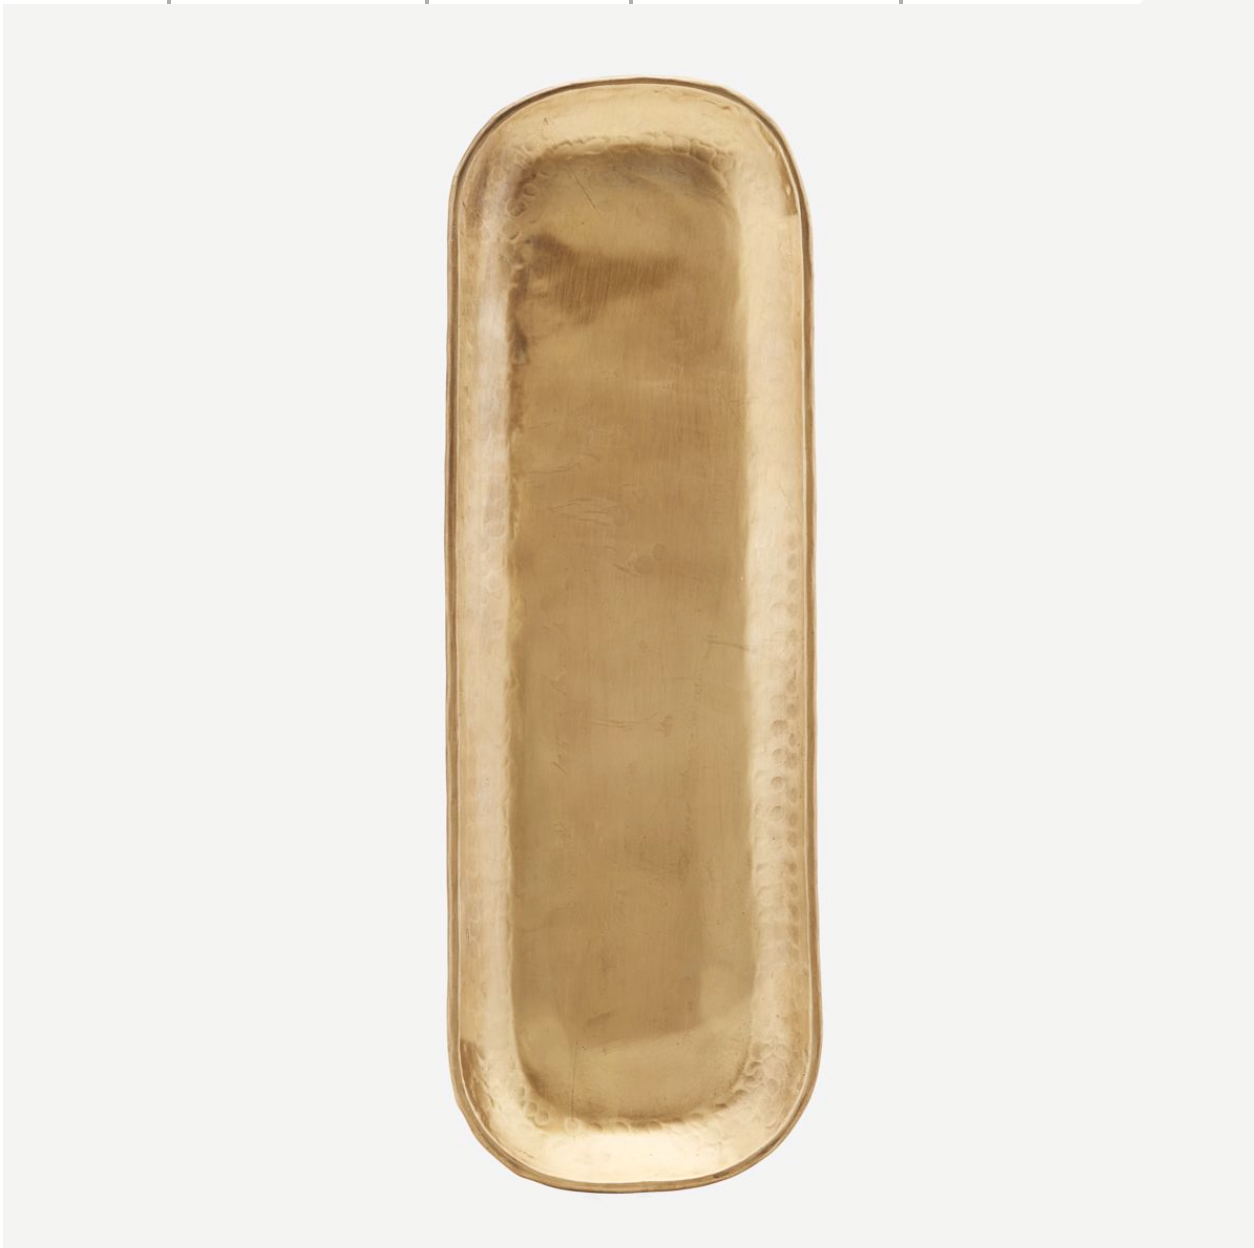 House Doctor Long Rounded Square Shaped Tray in Brass